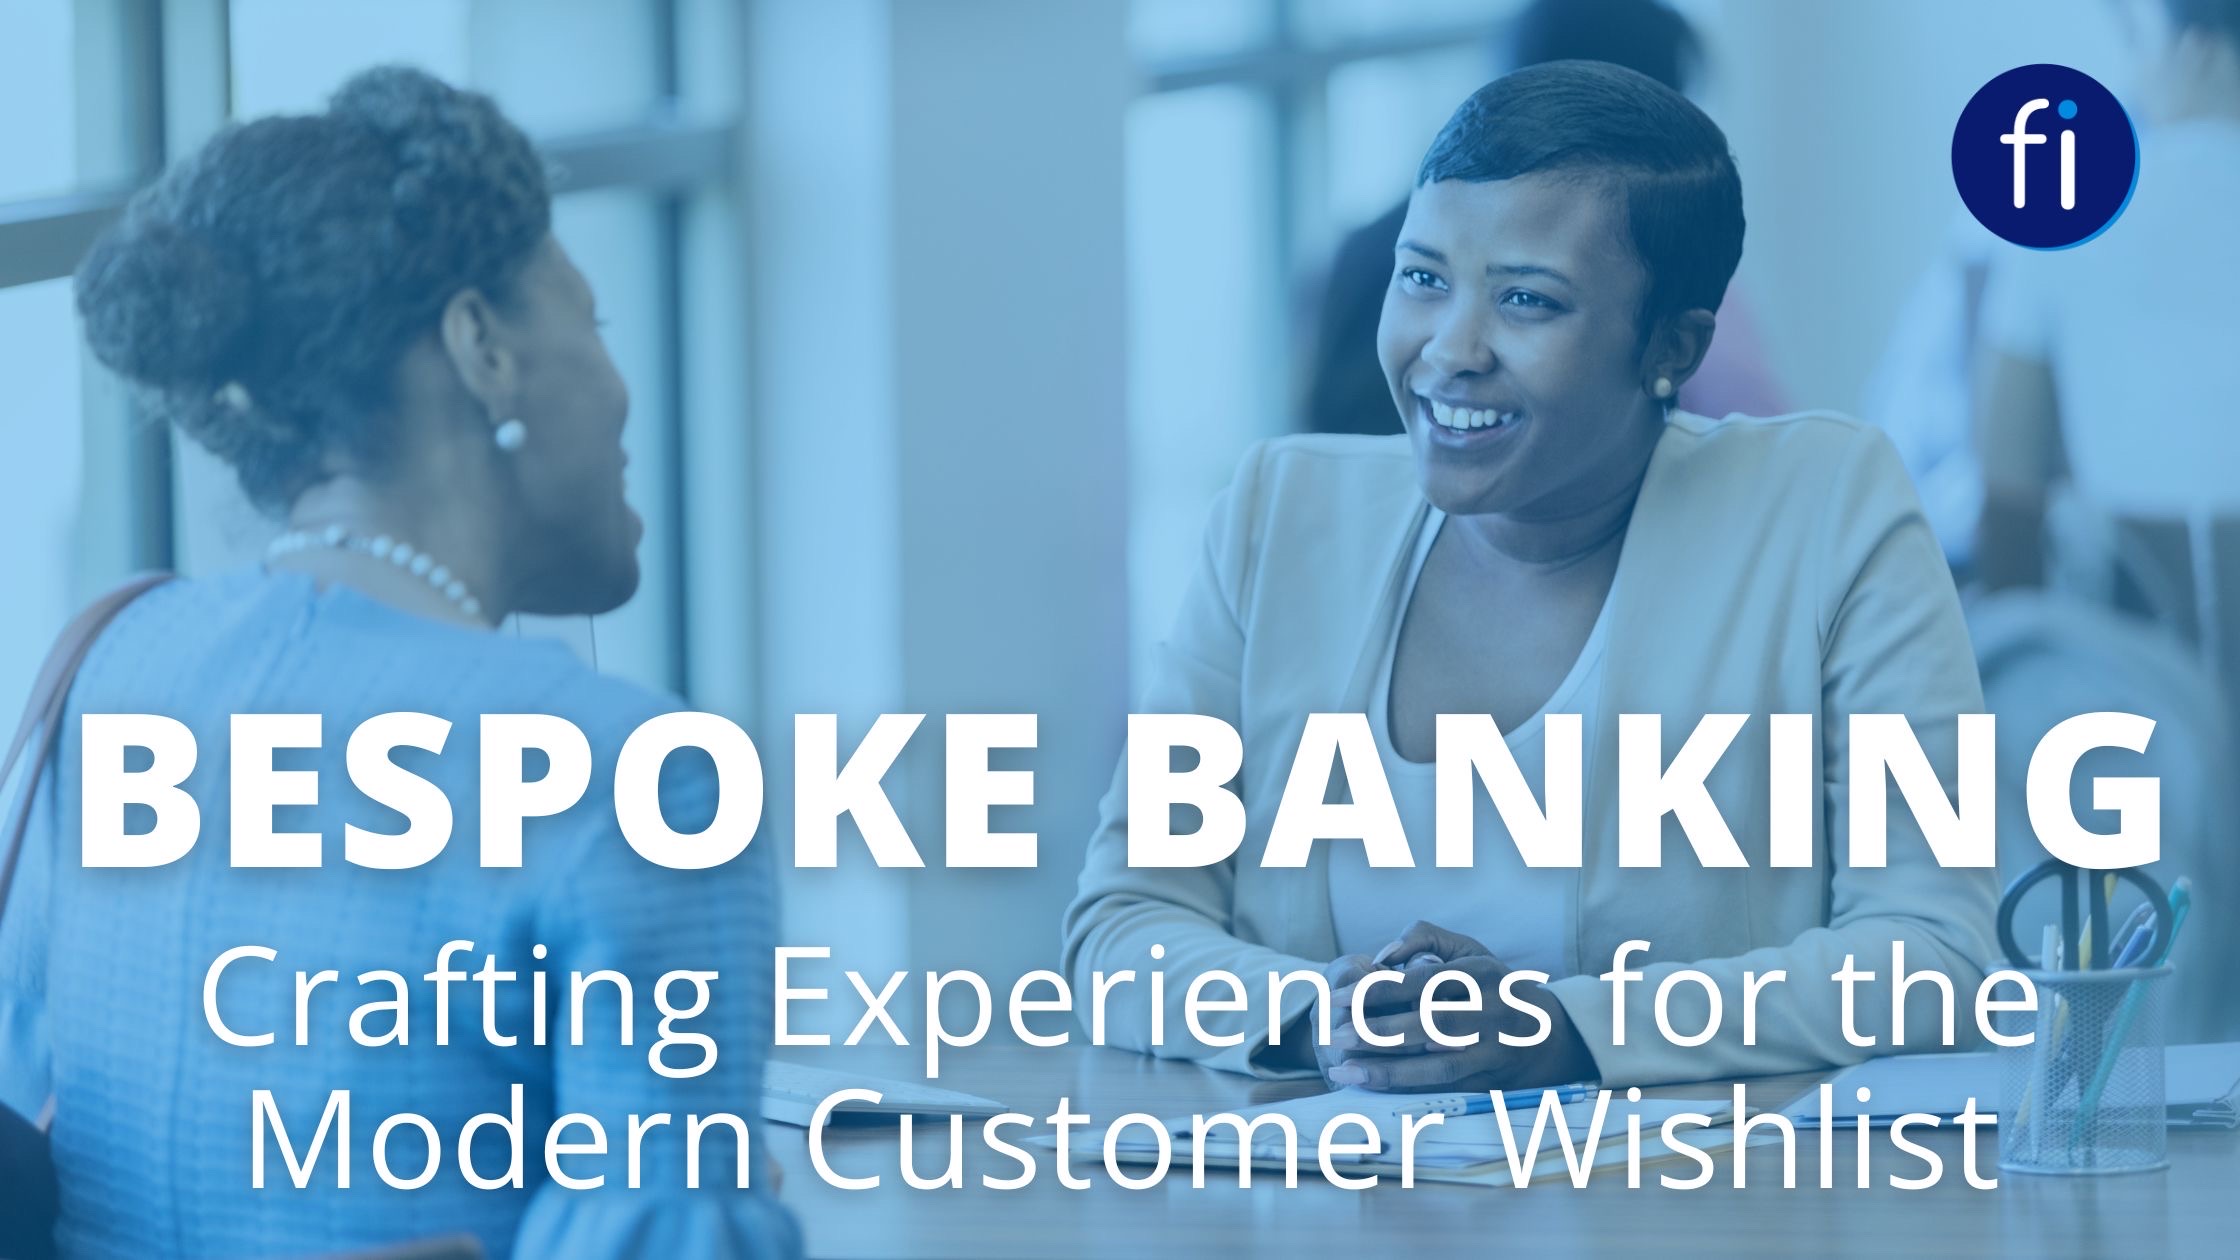 Bespoke Banking: Crafting Experiences for the Modern Customer Wishlist